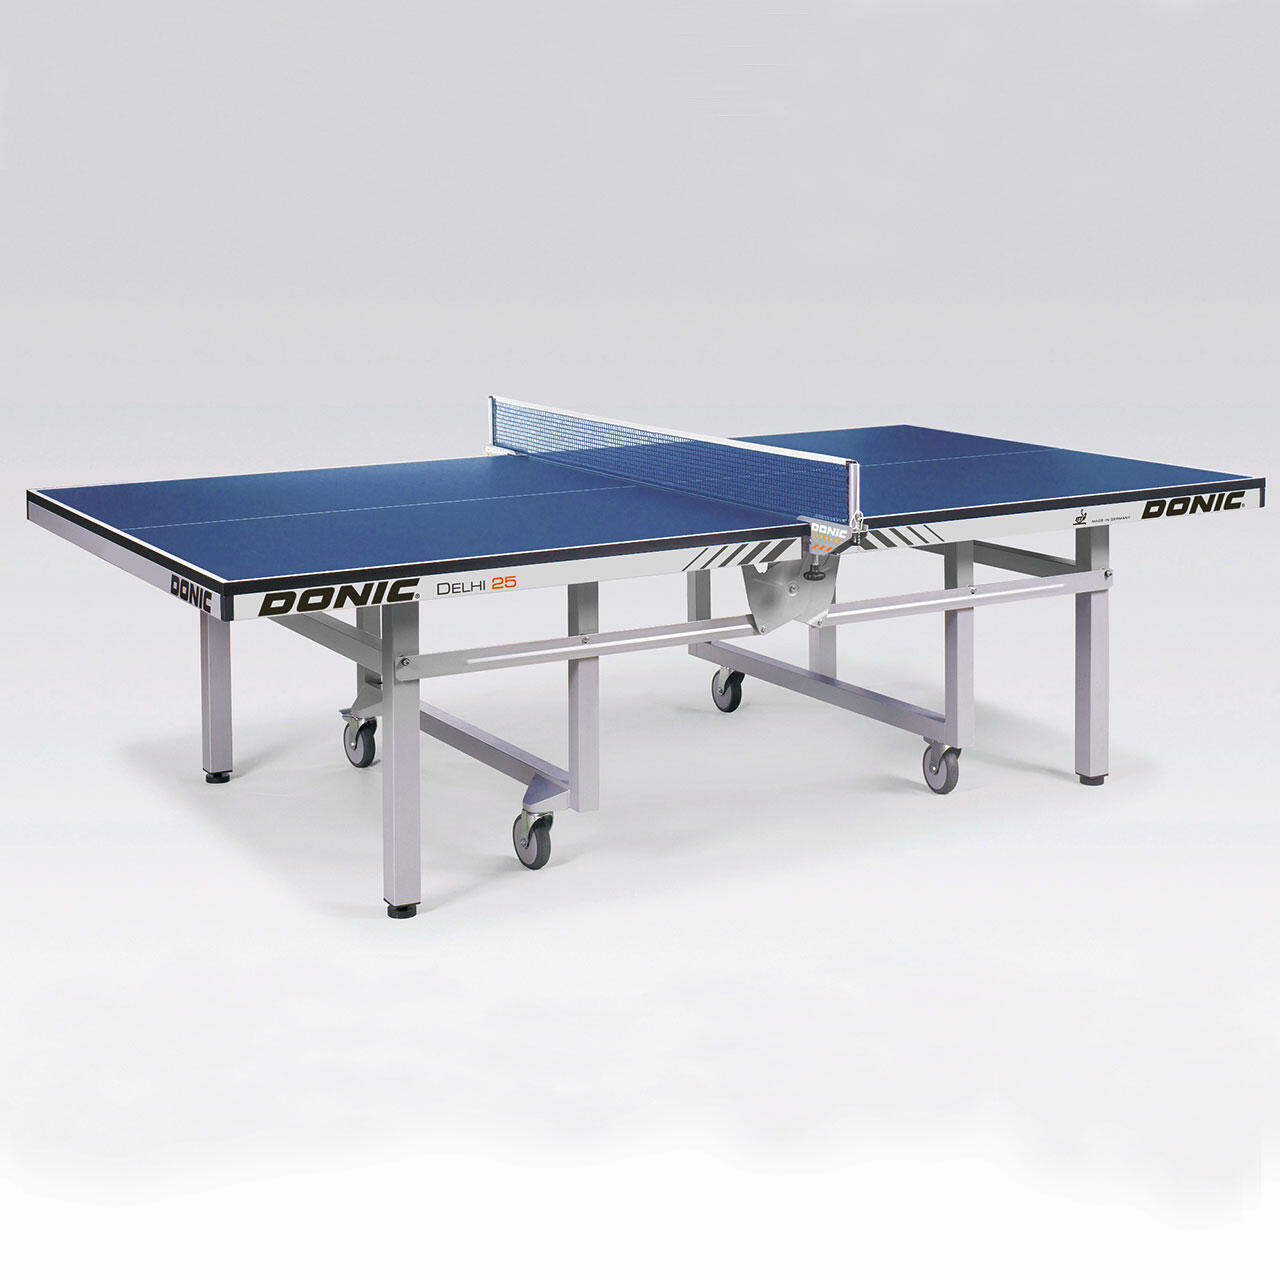 DONIC Donic Delhi 25 ITTF Approved Blue Table Tennis Table